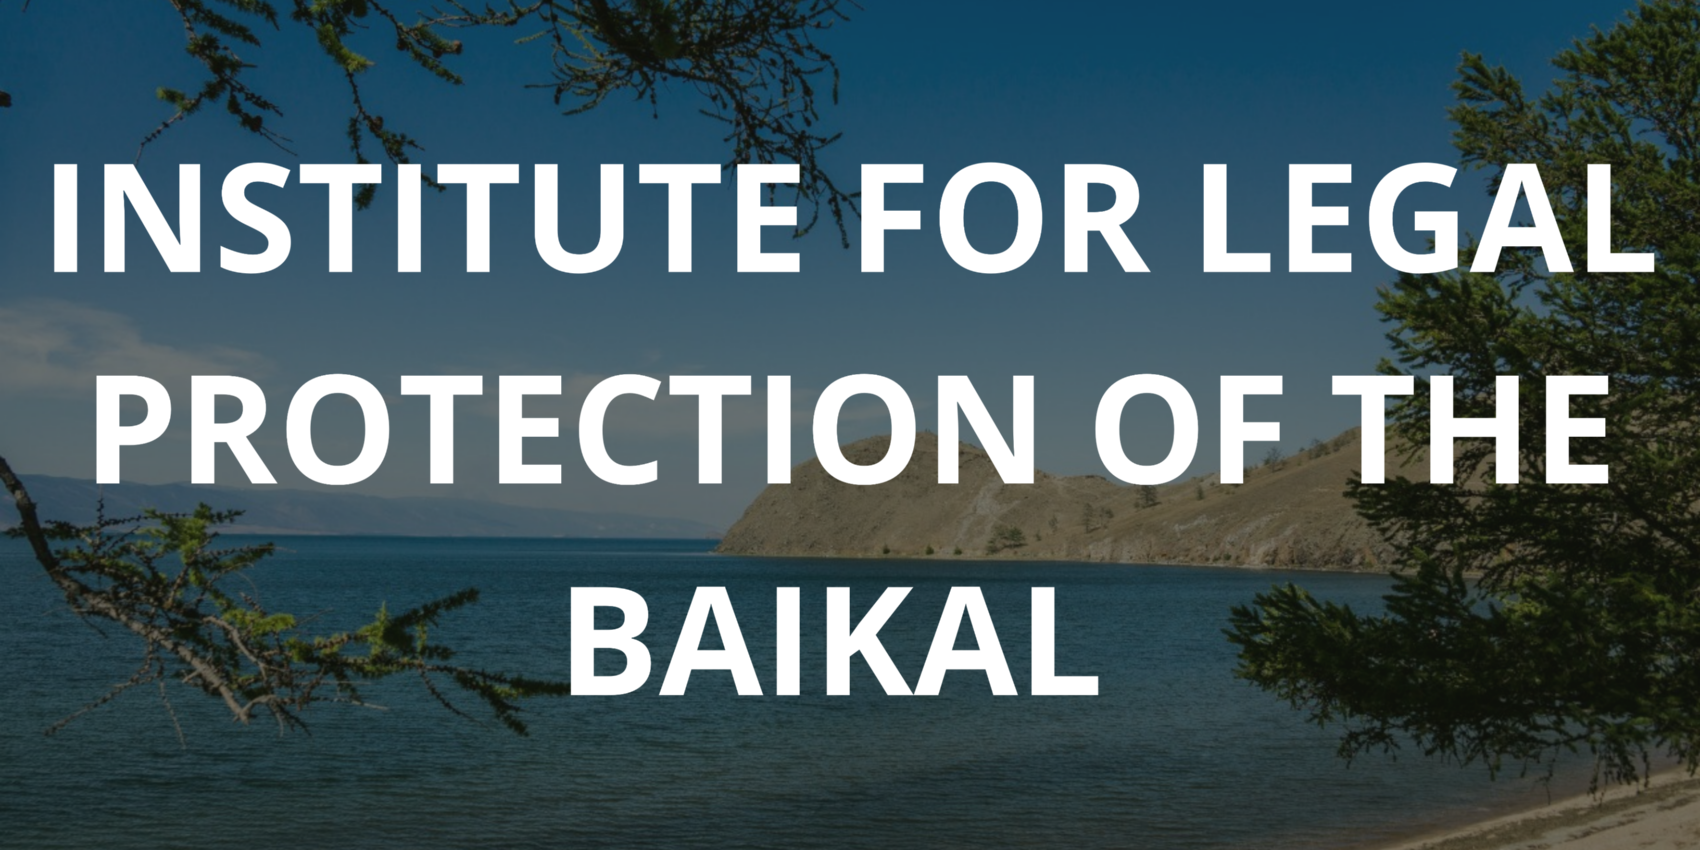 Institute%20for%20Legal%20Protection%20of%20the%20Baikal%20